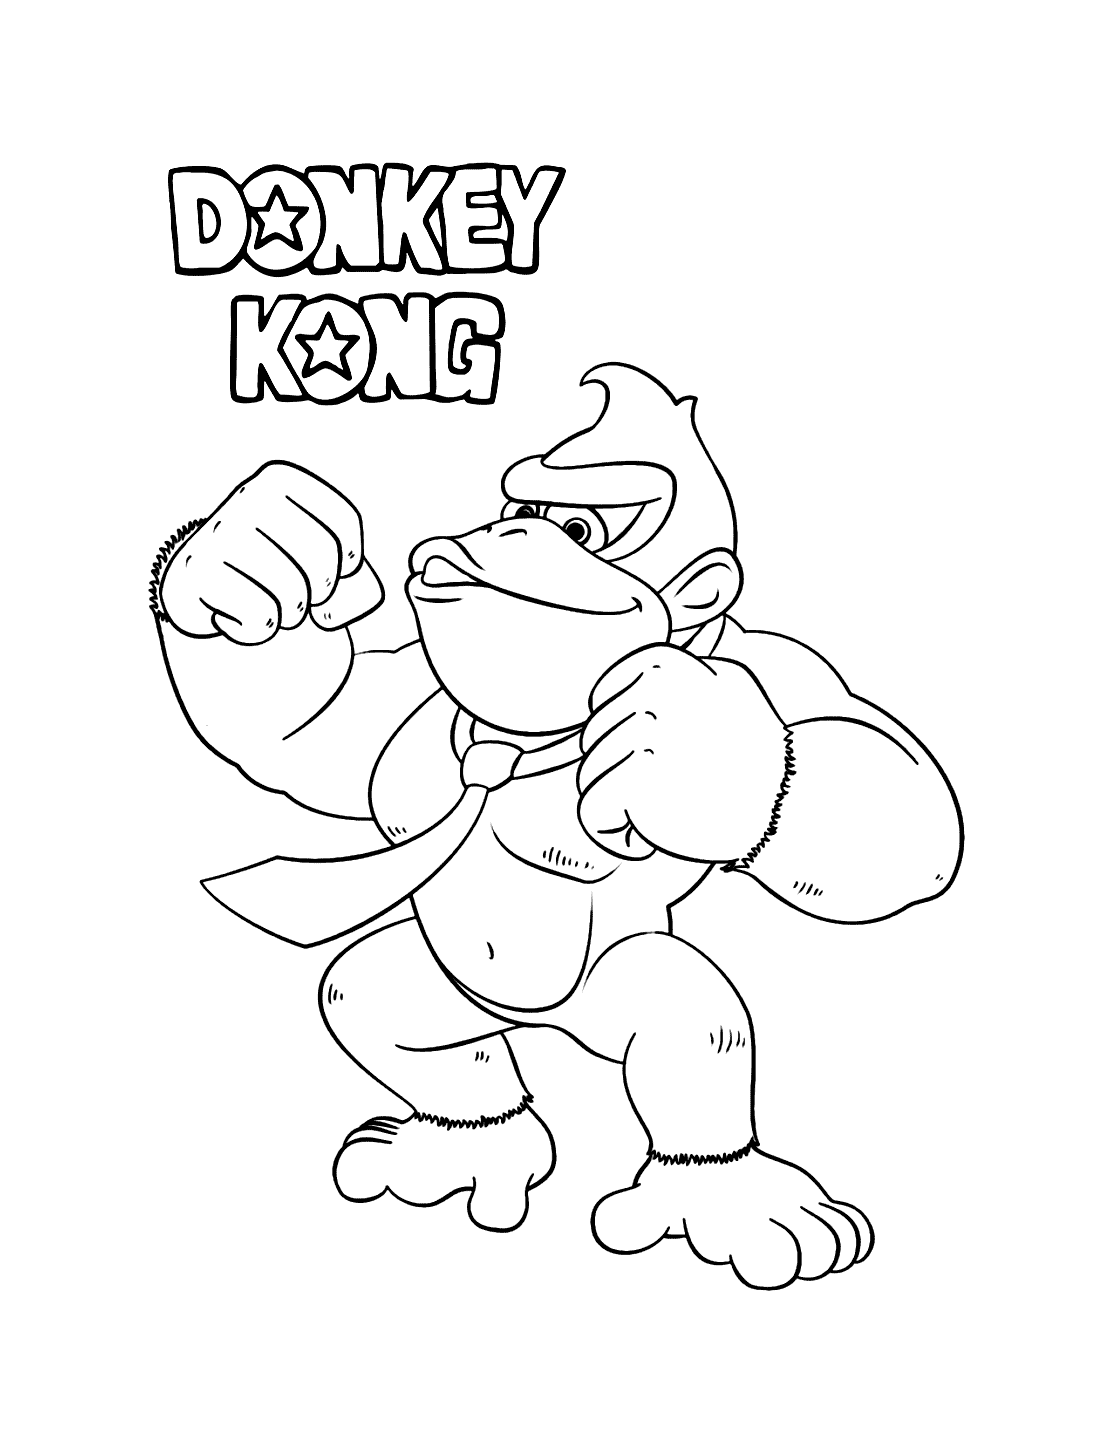 Donkey Kong Coloring Pages   Best Coloring Pages For Kids